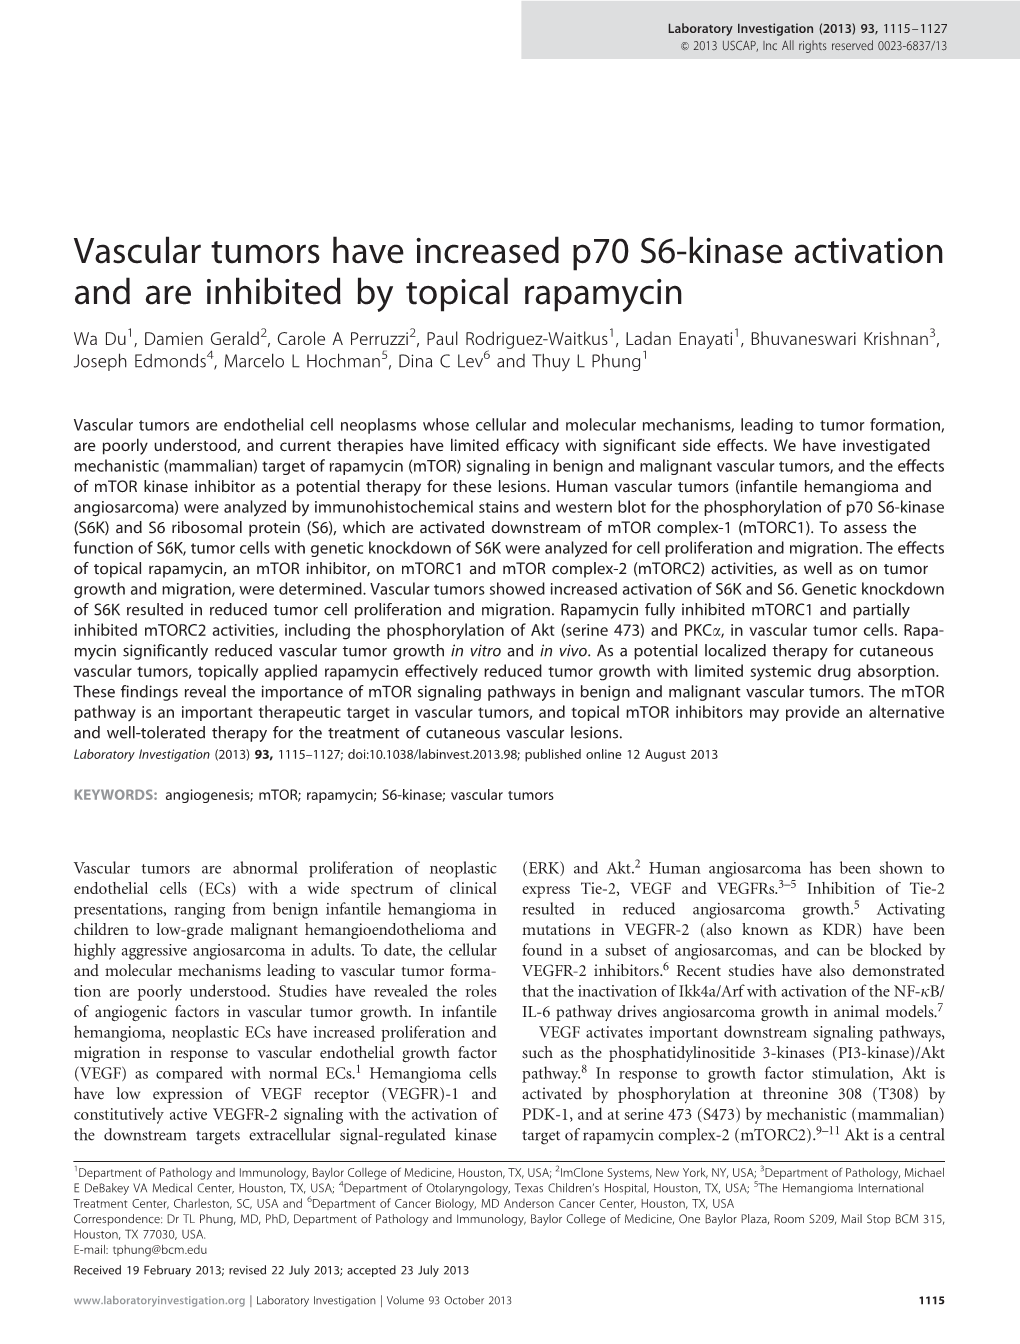 Vascular Tumors Have Increased P70 S6-Kinase Activation and Are Inhibited by Topical Rapamycin